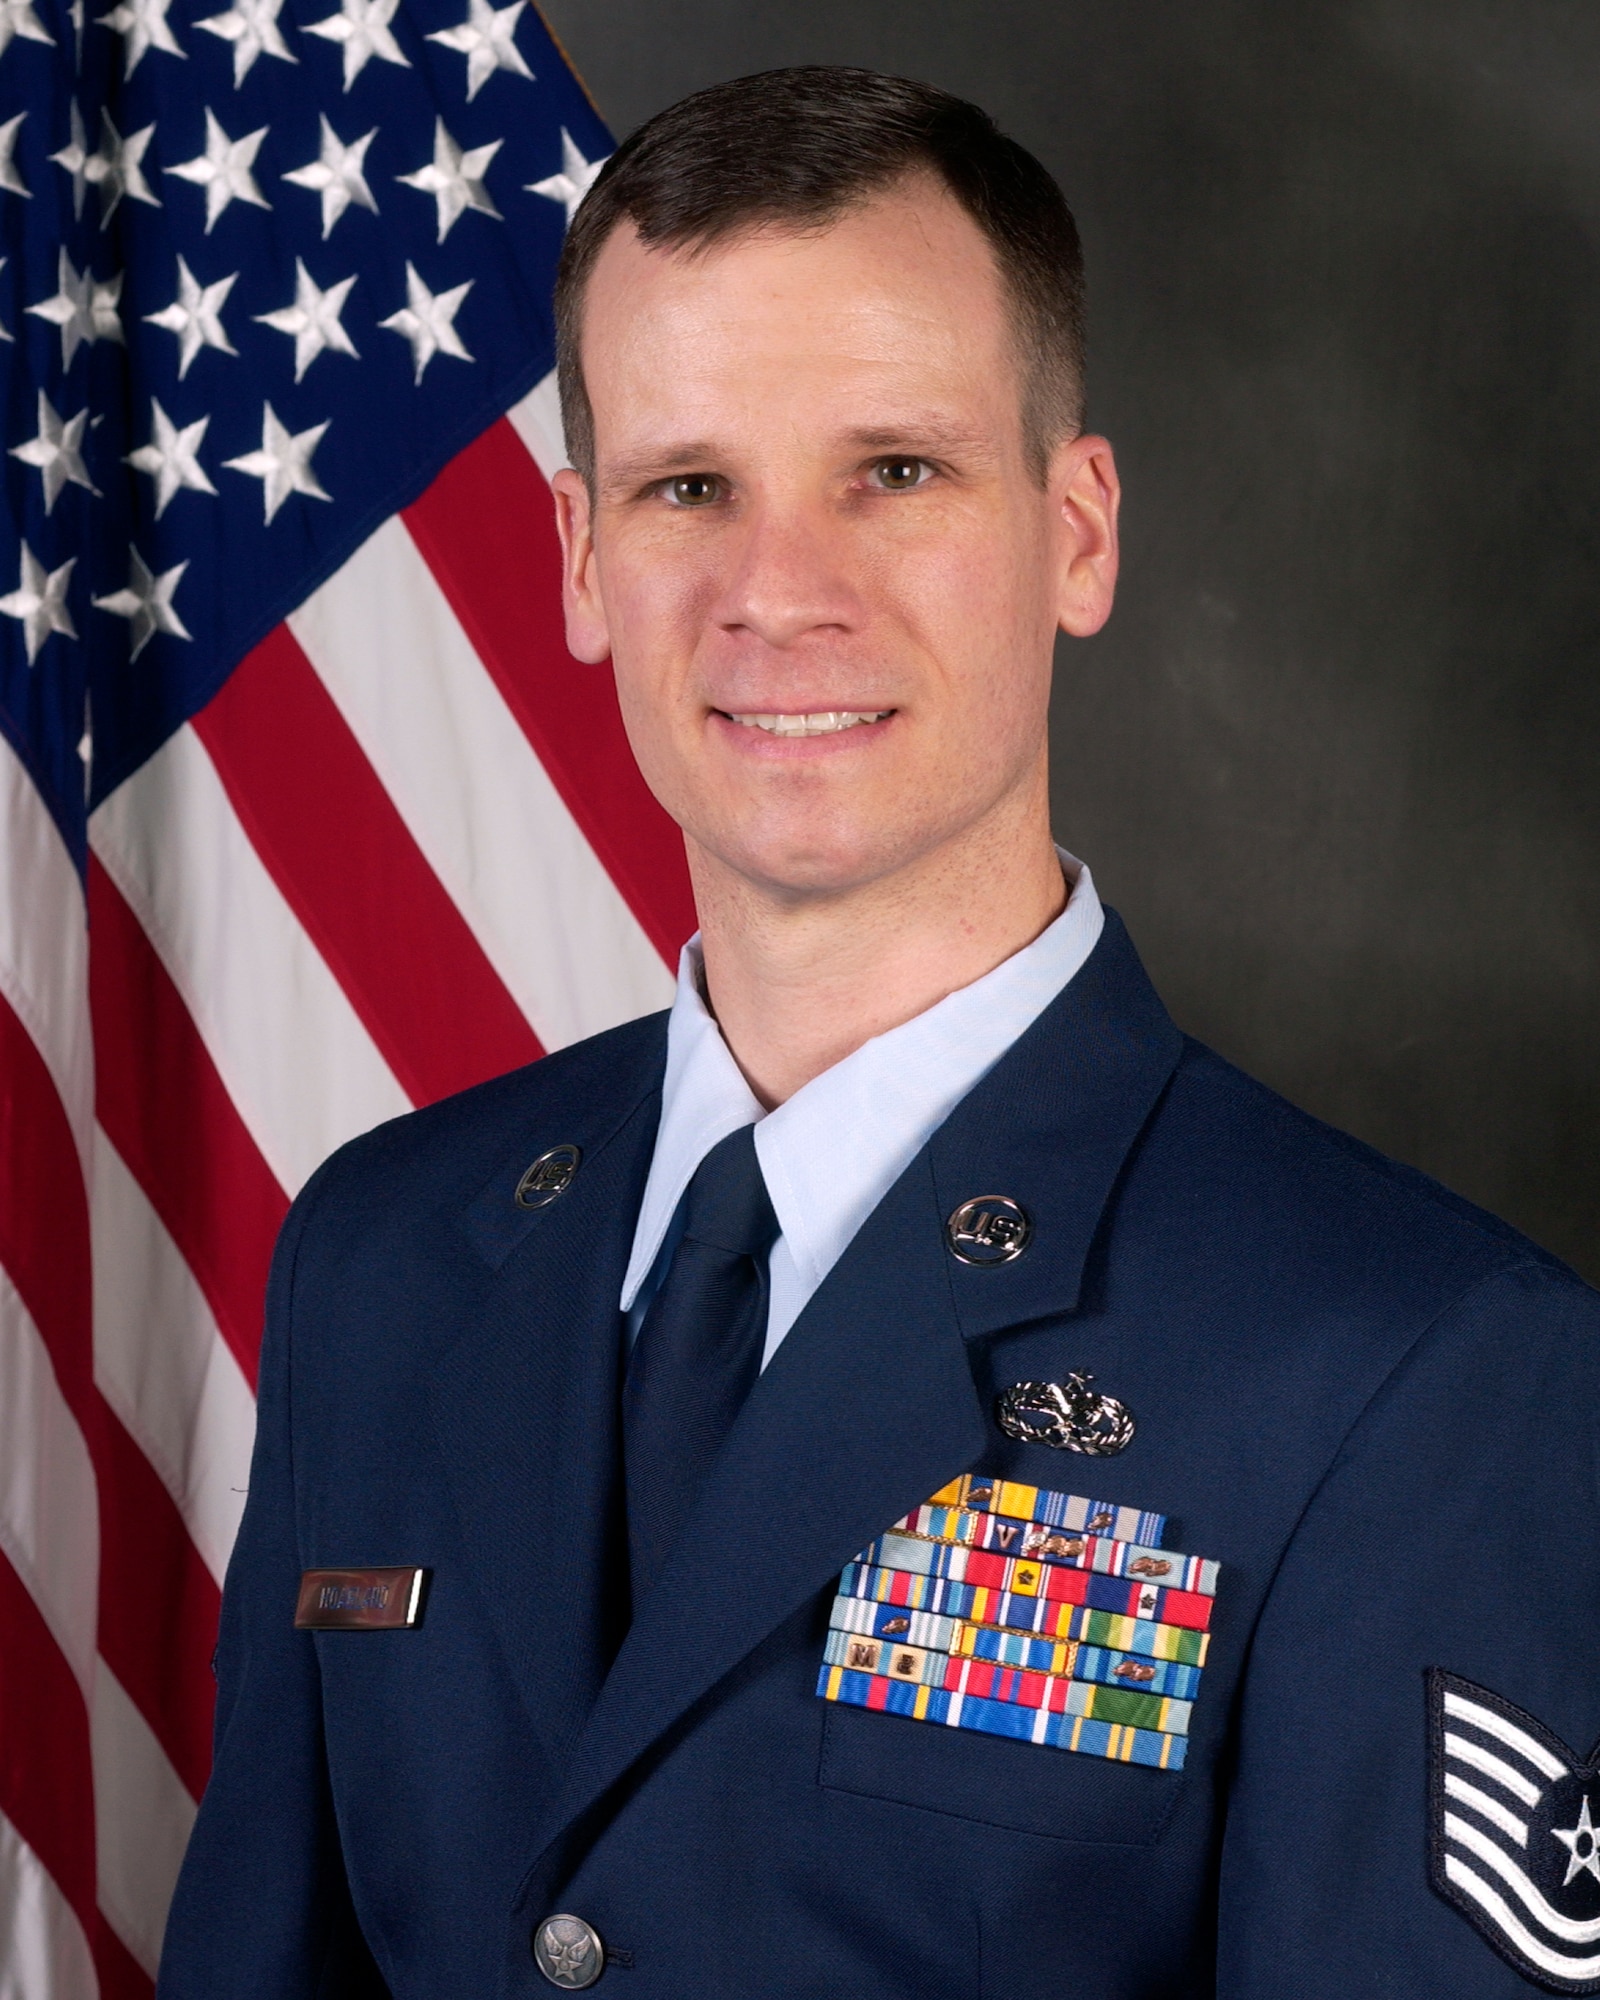 Tech. Sgt. John Hoagland is a nondestructive tester in the 123rd Maintenance Squadron here. His leadership in unit training helped secure an 88.33 percent fully mission-capable  rate for Kentucky C-130s during a deployment to the Central Command AOR in 2007.